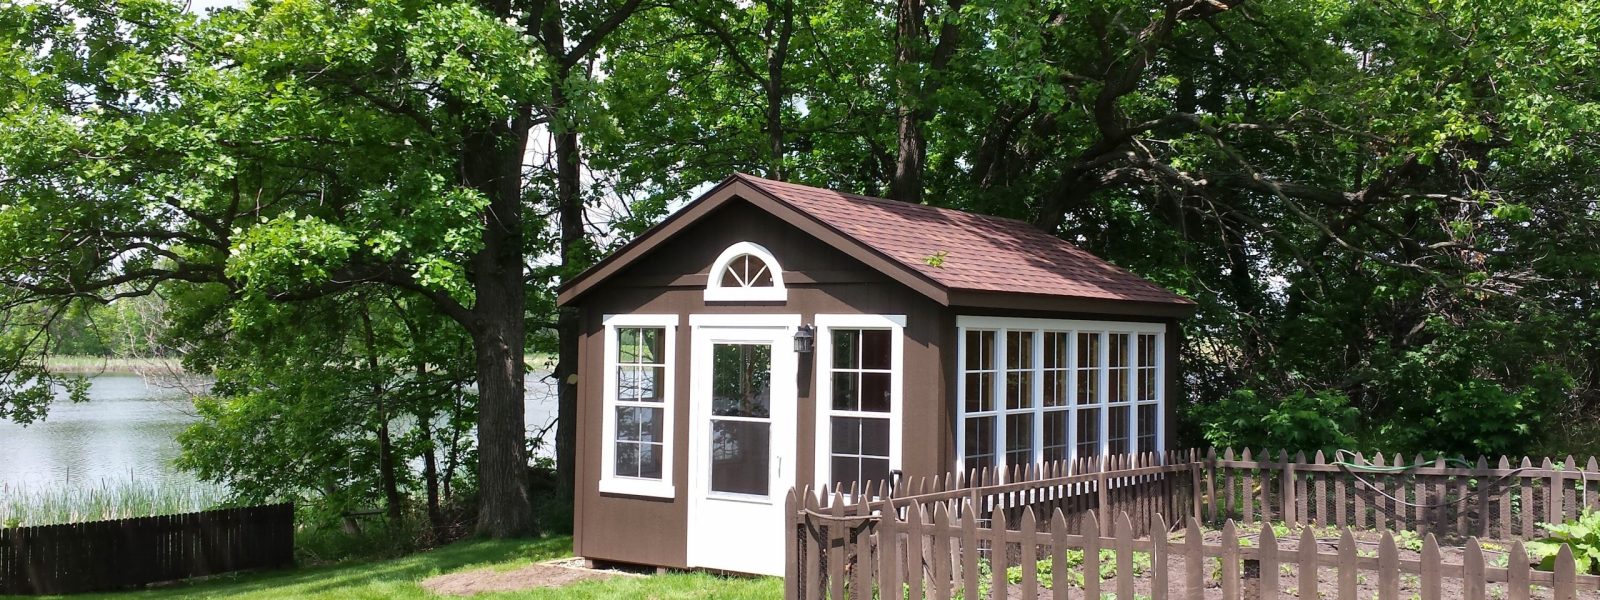 The Sunroom - A Fully-Enclosed Backyard Pavilion For Sale 